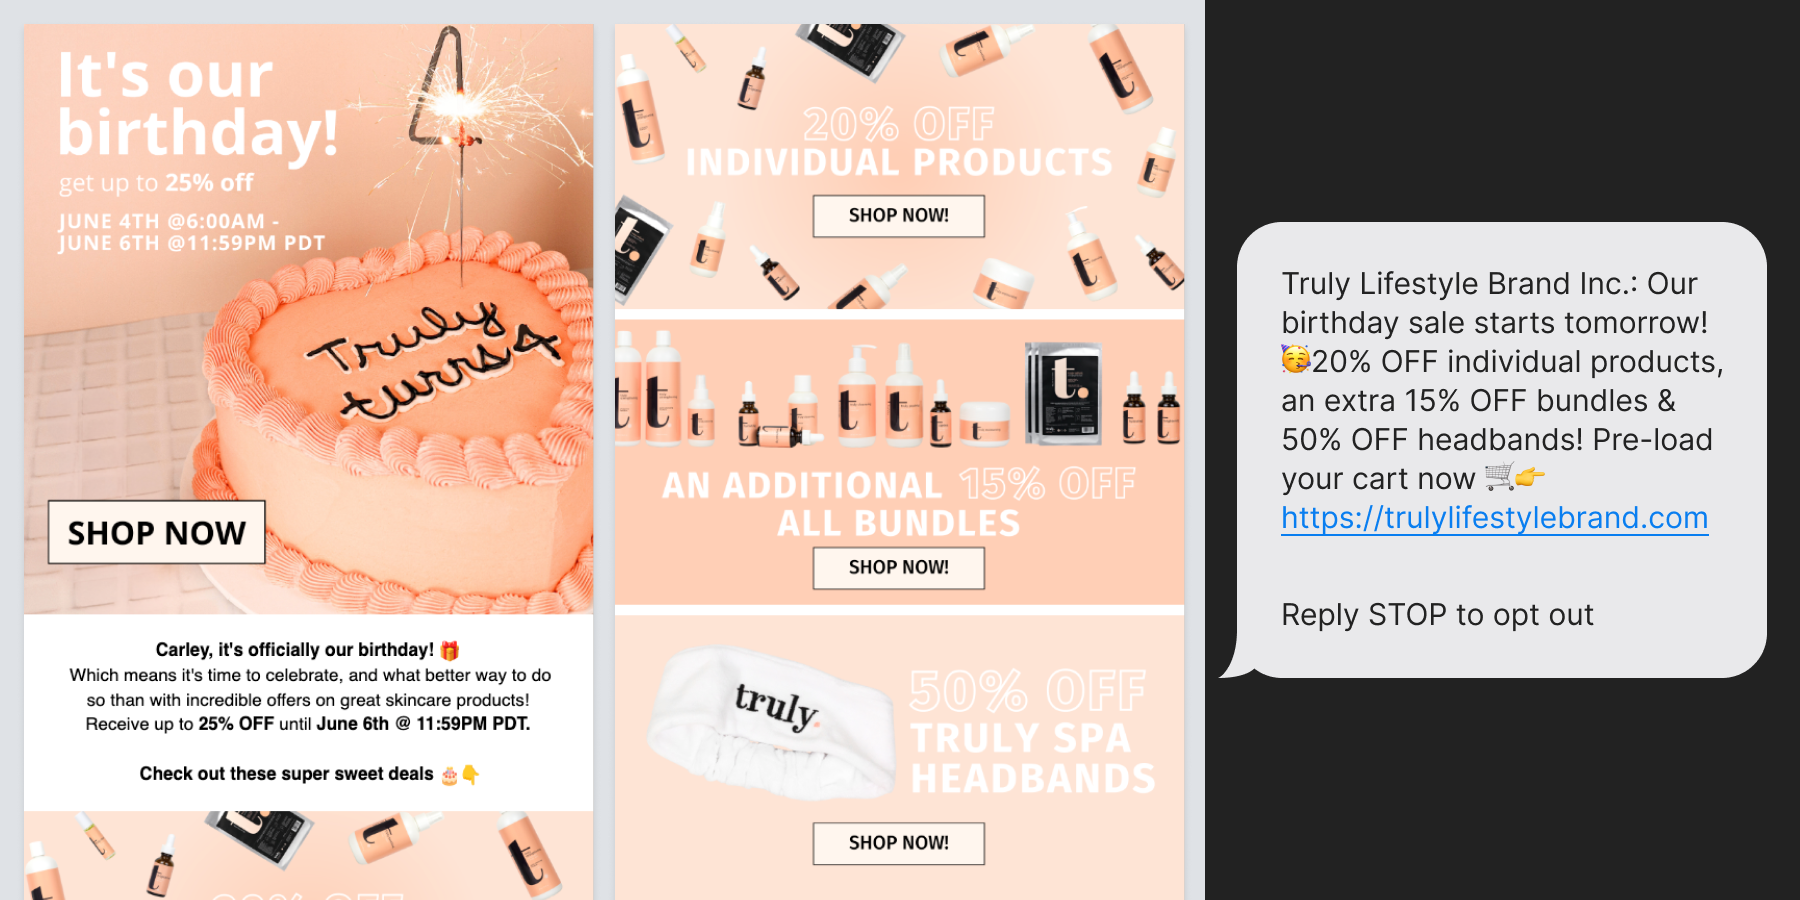 Truly Lifestyle Brand's Birthday Campaign Examples